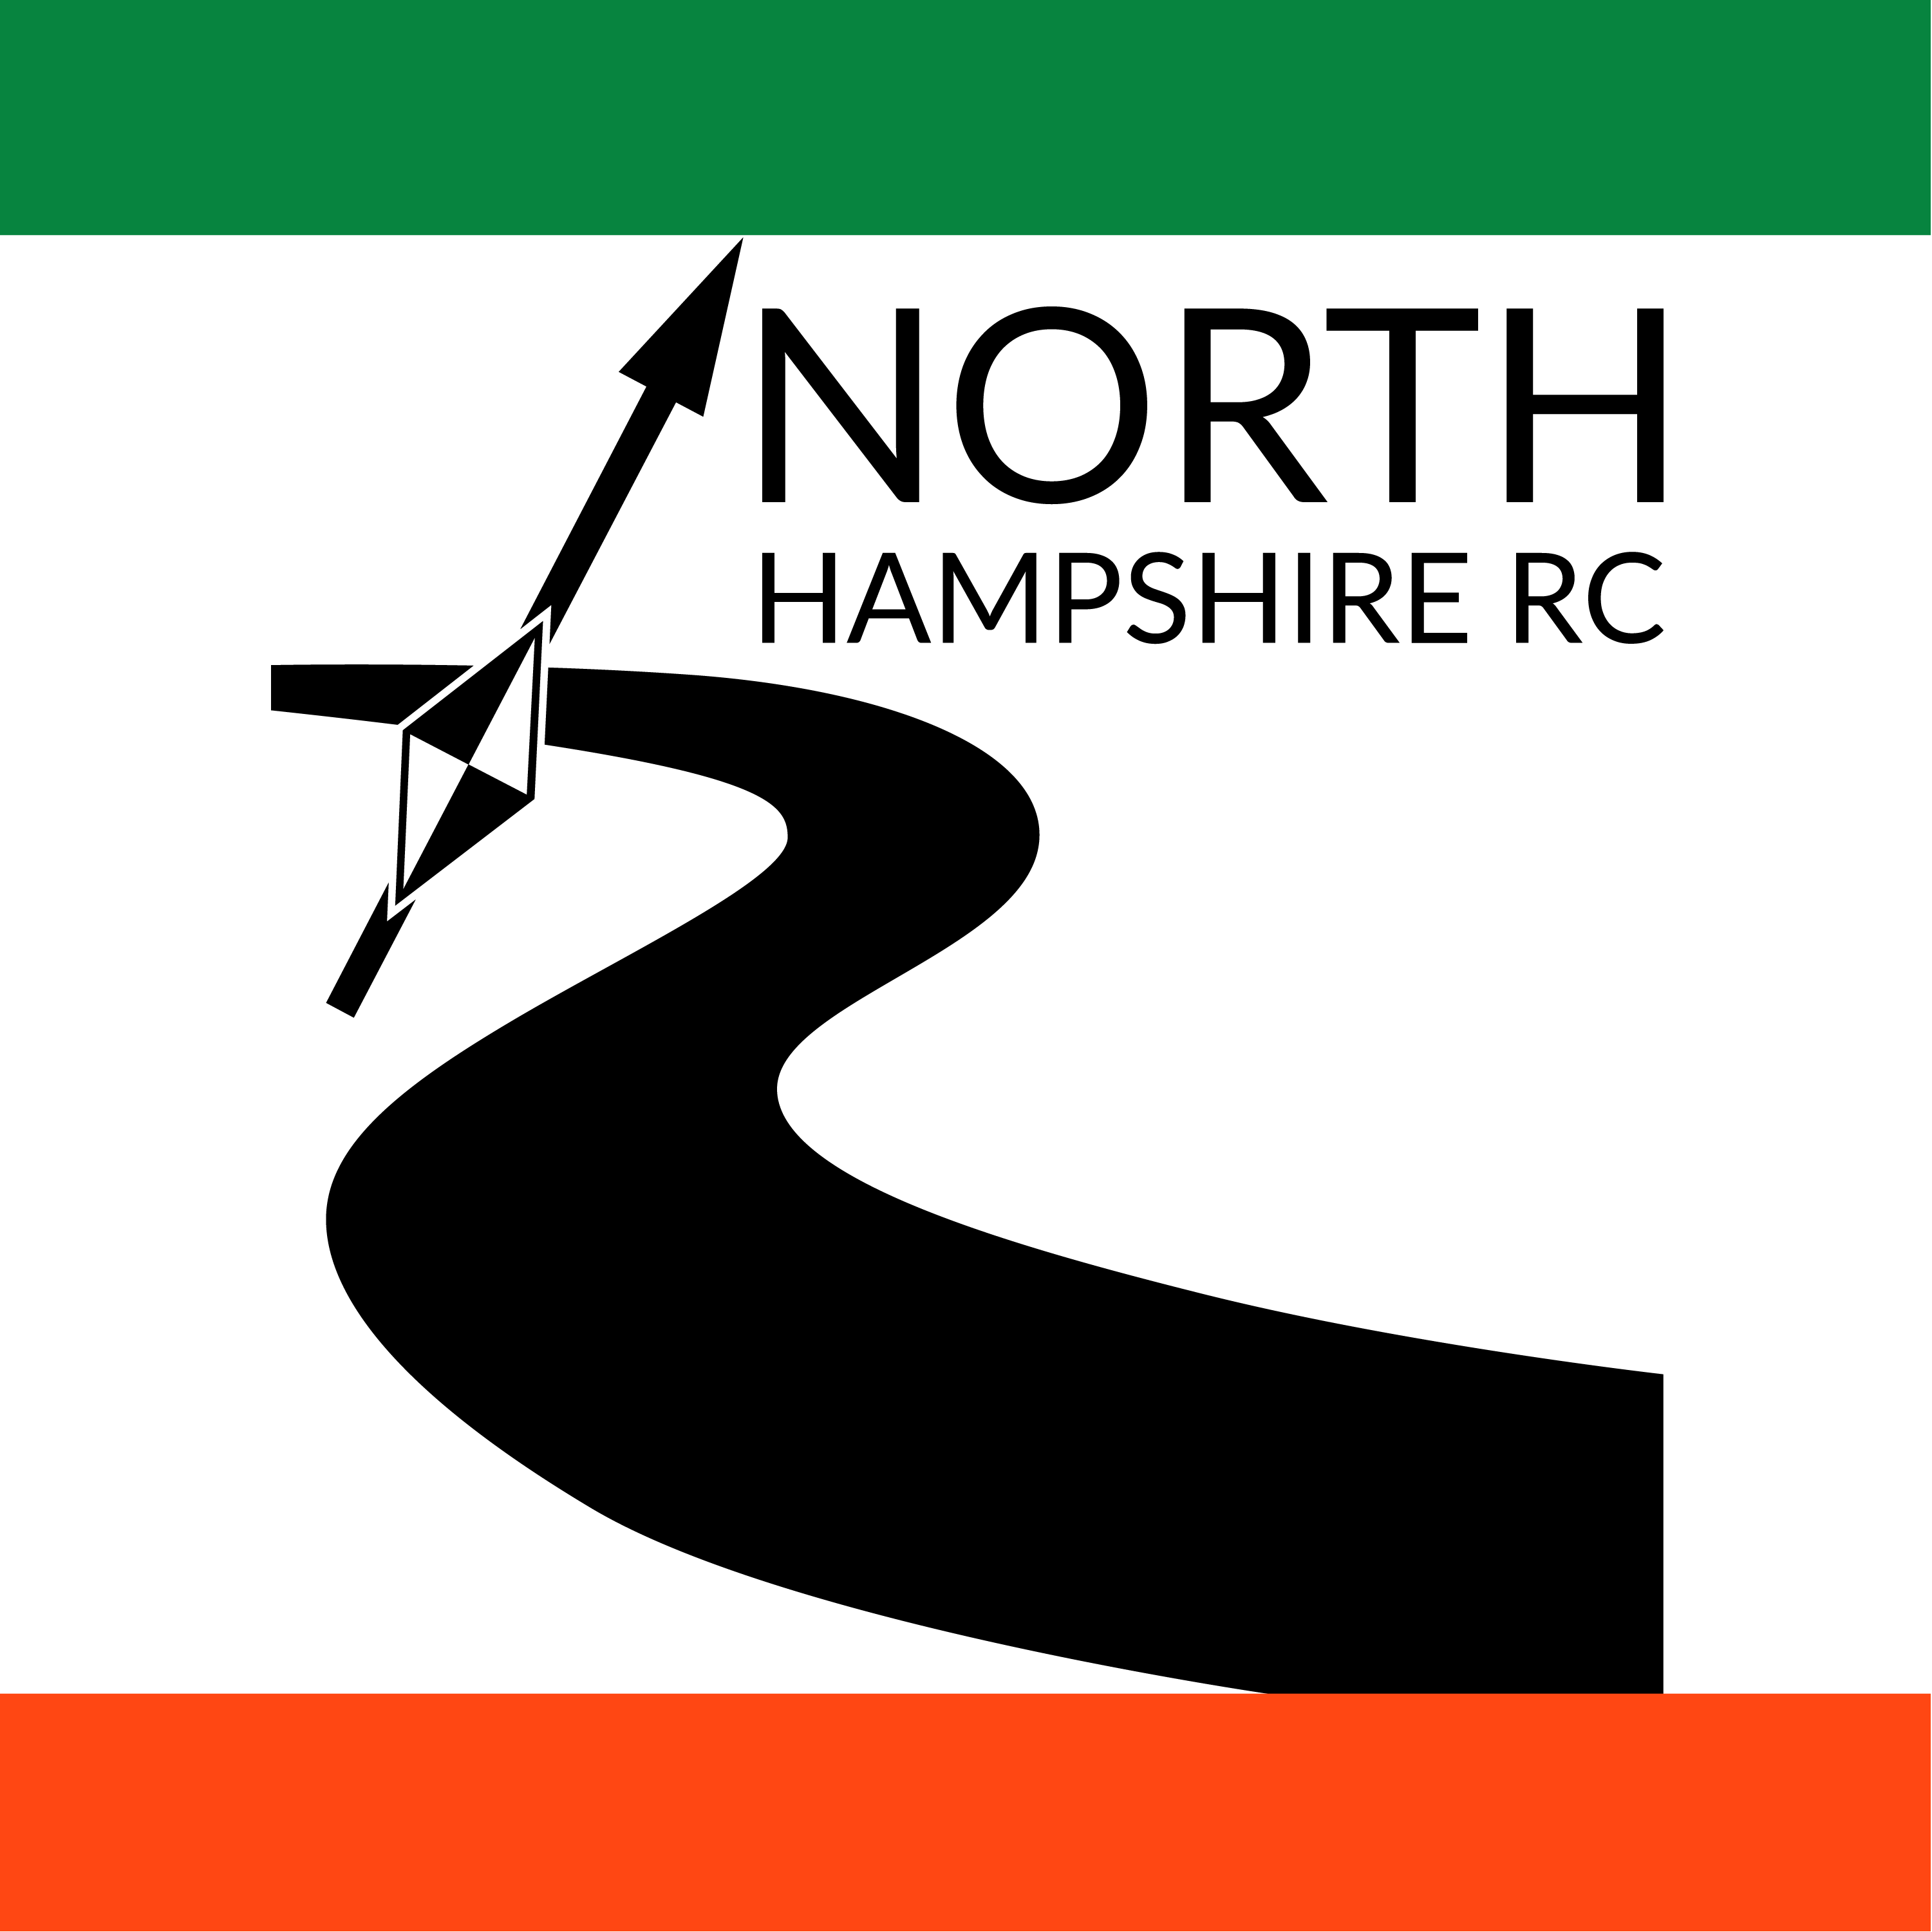 Club Image for NORTH HAMPSHIRE RC